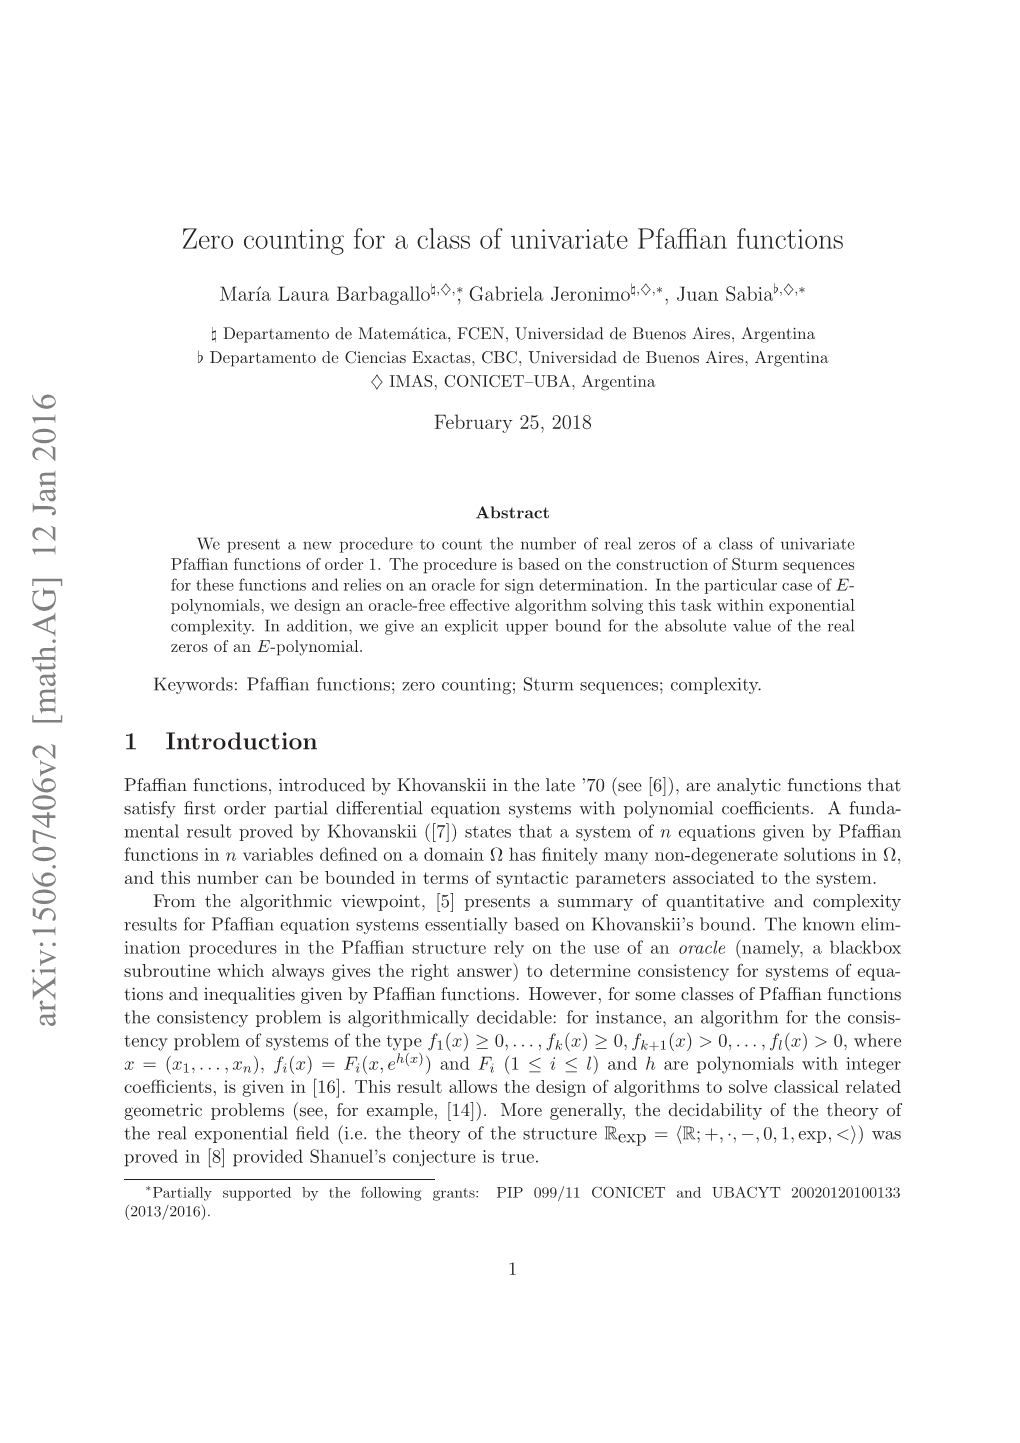 Zero Counting for a Class of Univariate Pfaffian Functions